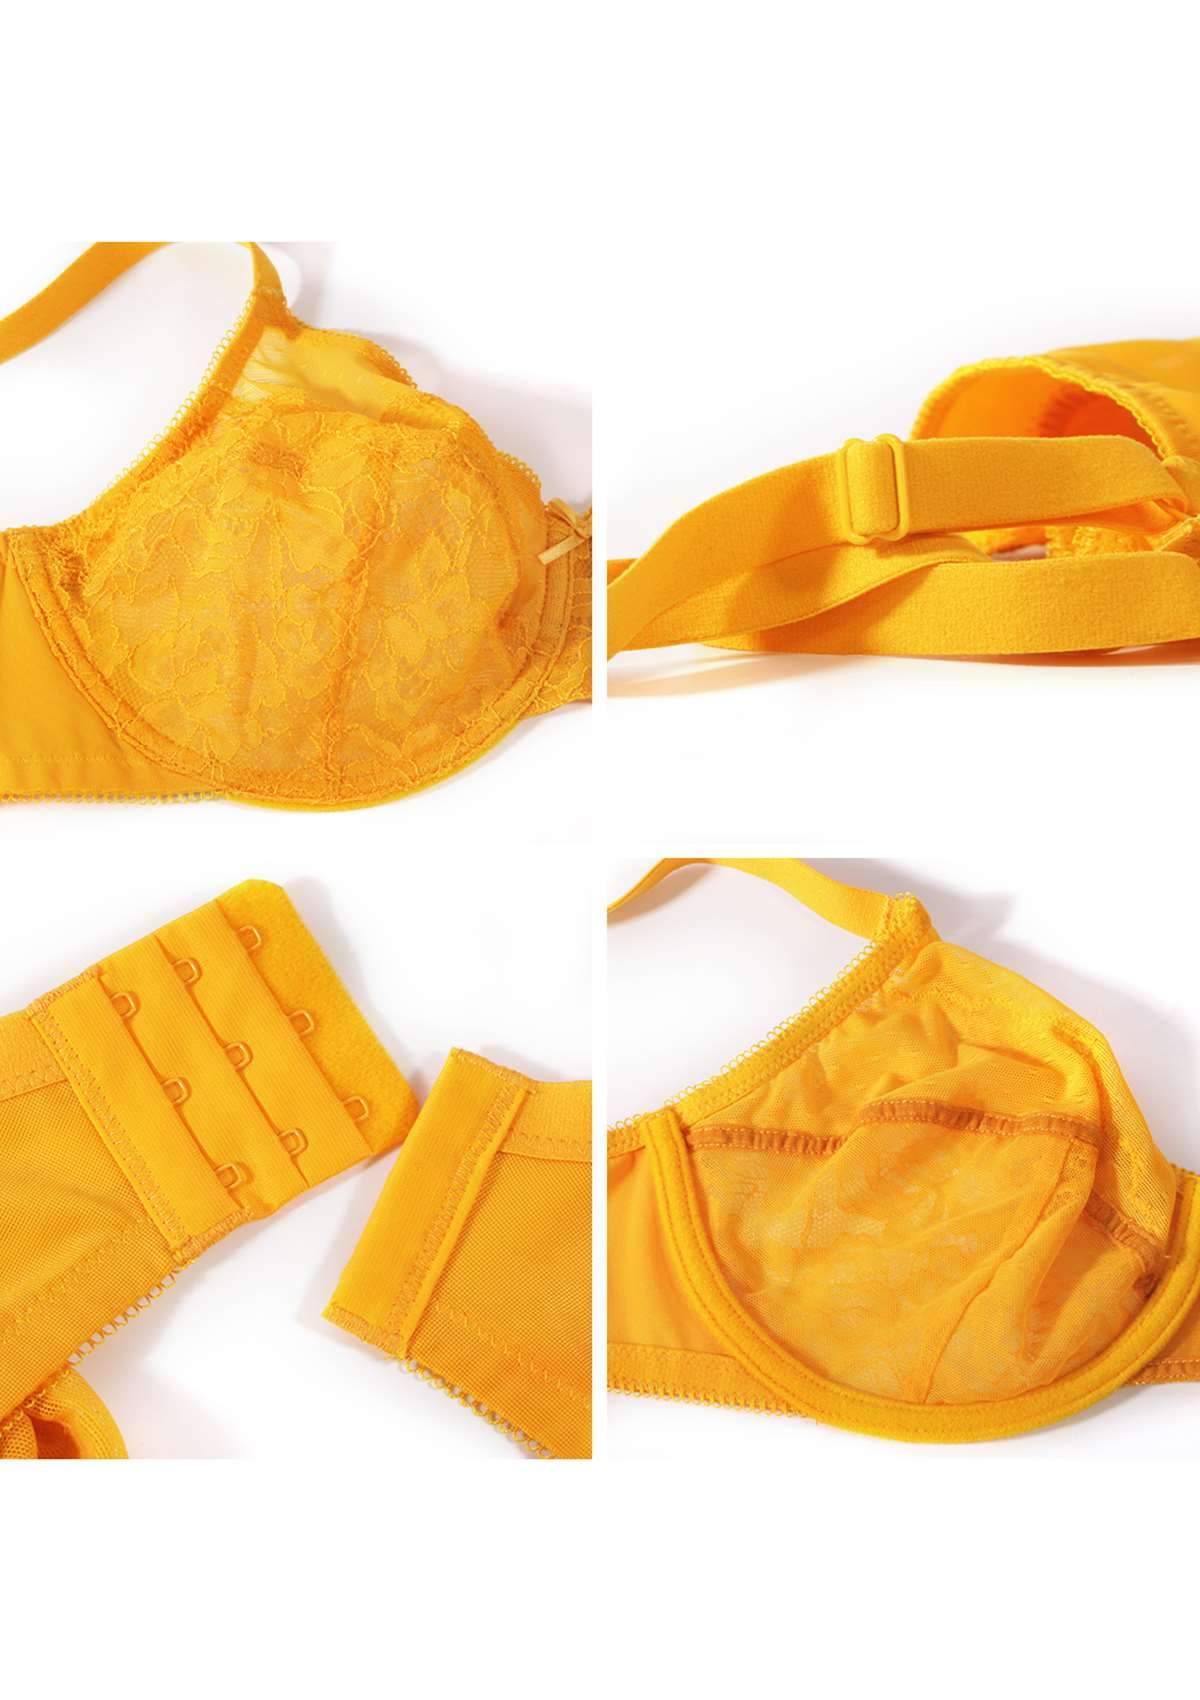 HSIA Enchante Bra And Panty Sets: Unpadded Bra With Back Support - Cadmium Yellow / 34 / DDD/F